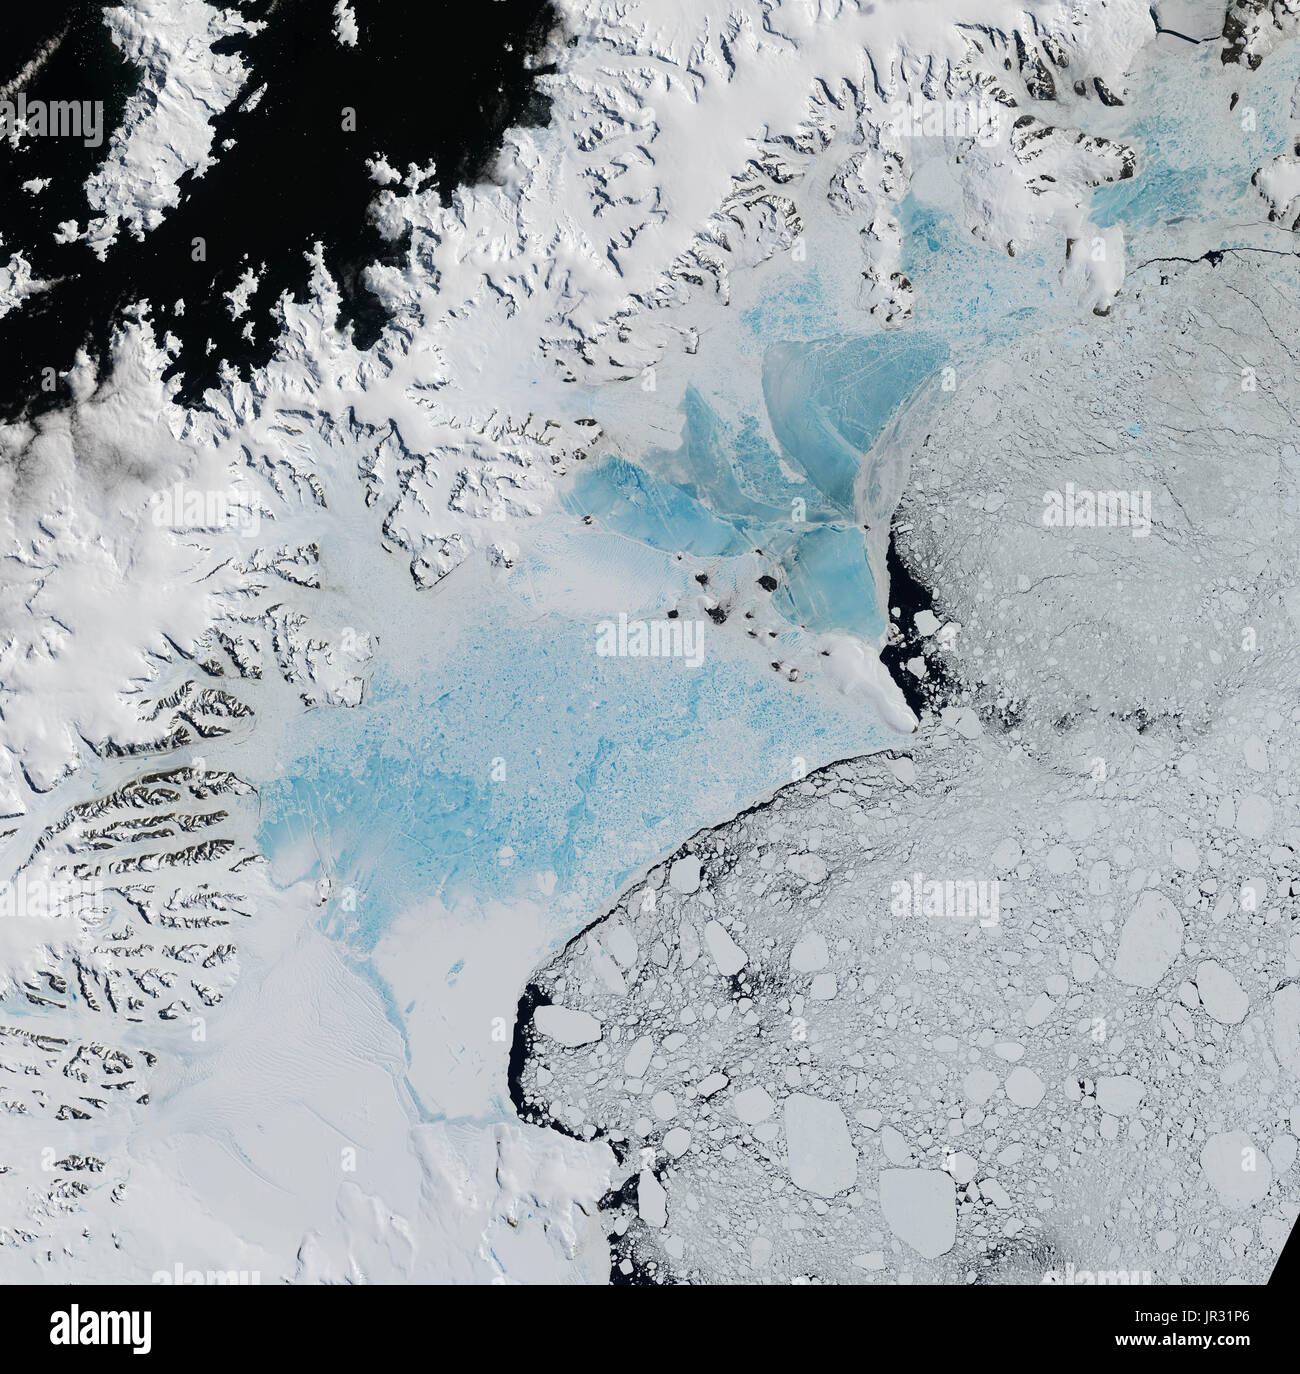 Northern part of the Larsen Ice Shelf, comprised of four natural-color satellite images captured by the Operational Land Imager (OLI) on Landsat 8 on January 6 and 8, 2016. Two large sections of the ice shelf have collapsed in recent years. Blue, meltwater-covered sea ice is now in the embayments where Larsen A and Larsen B once were. A remnant of Larsen B, now known as the Scar Inlet Ice Shelf, can still be seen to the south. Stock Photo